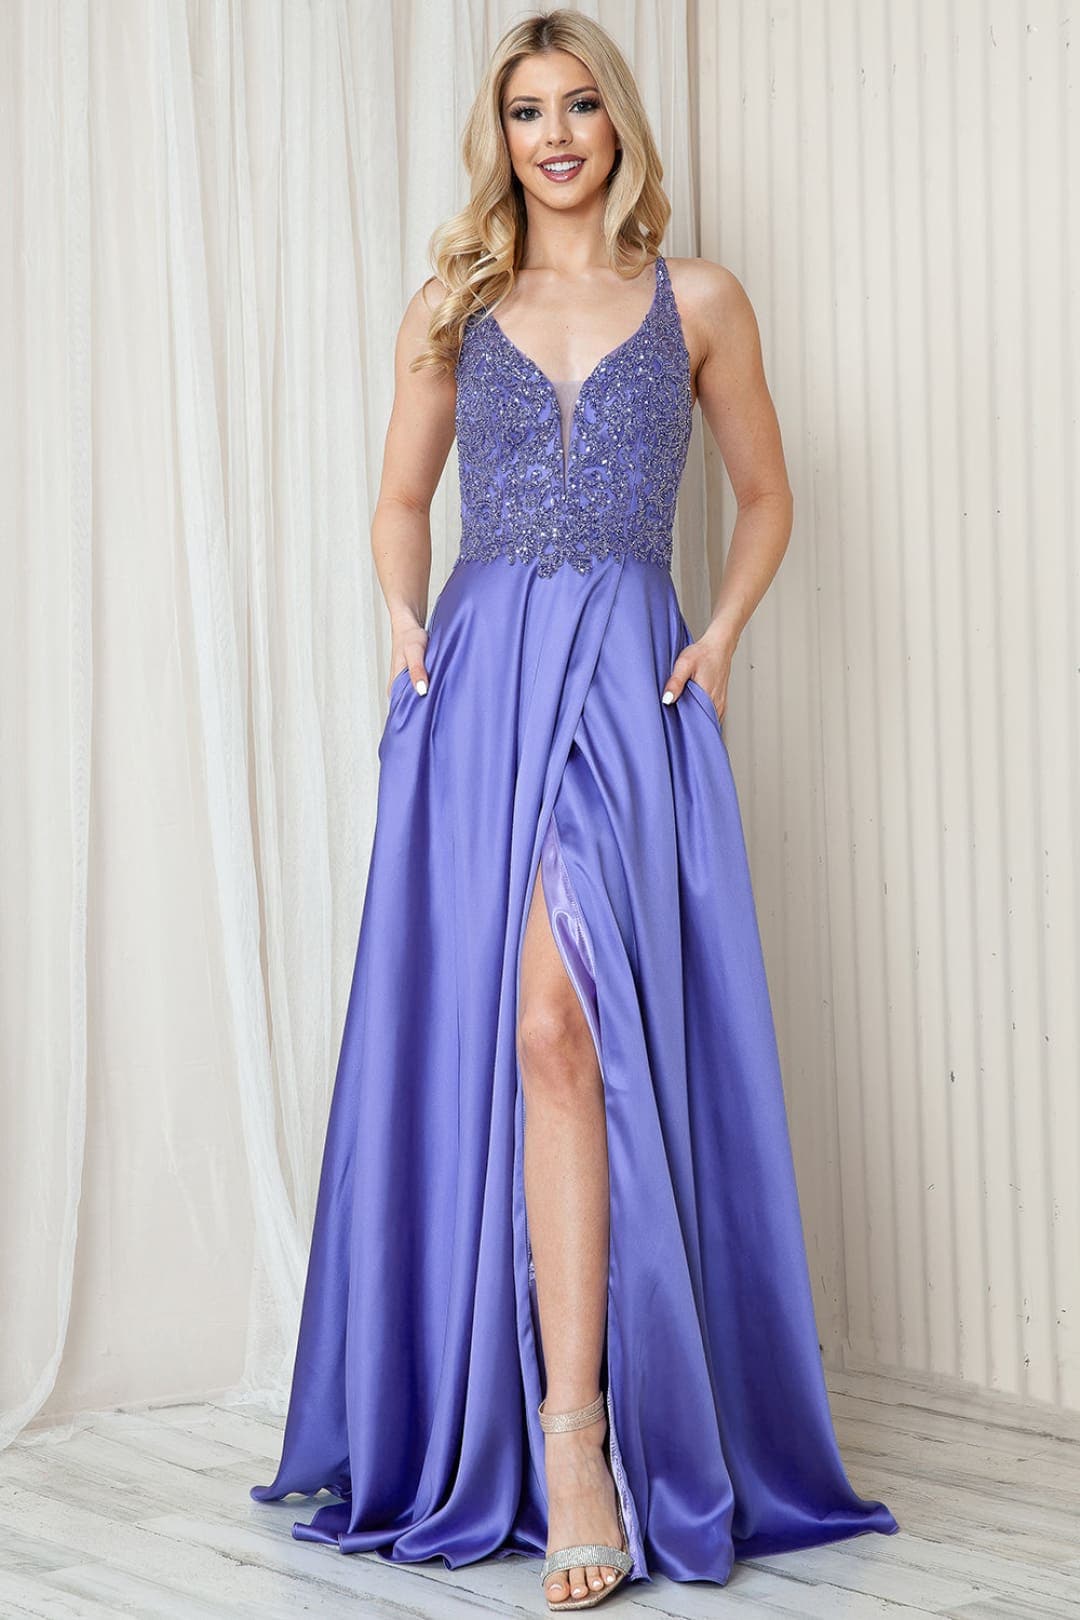 Formal Pageant Gown - LILAC